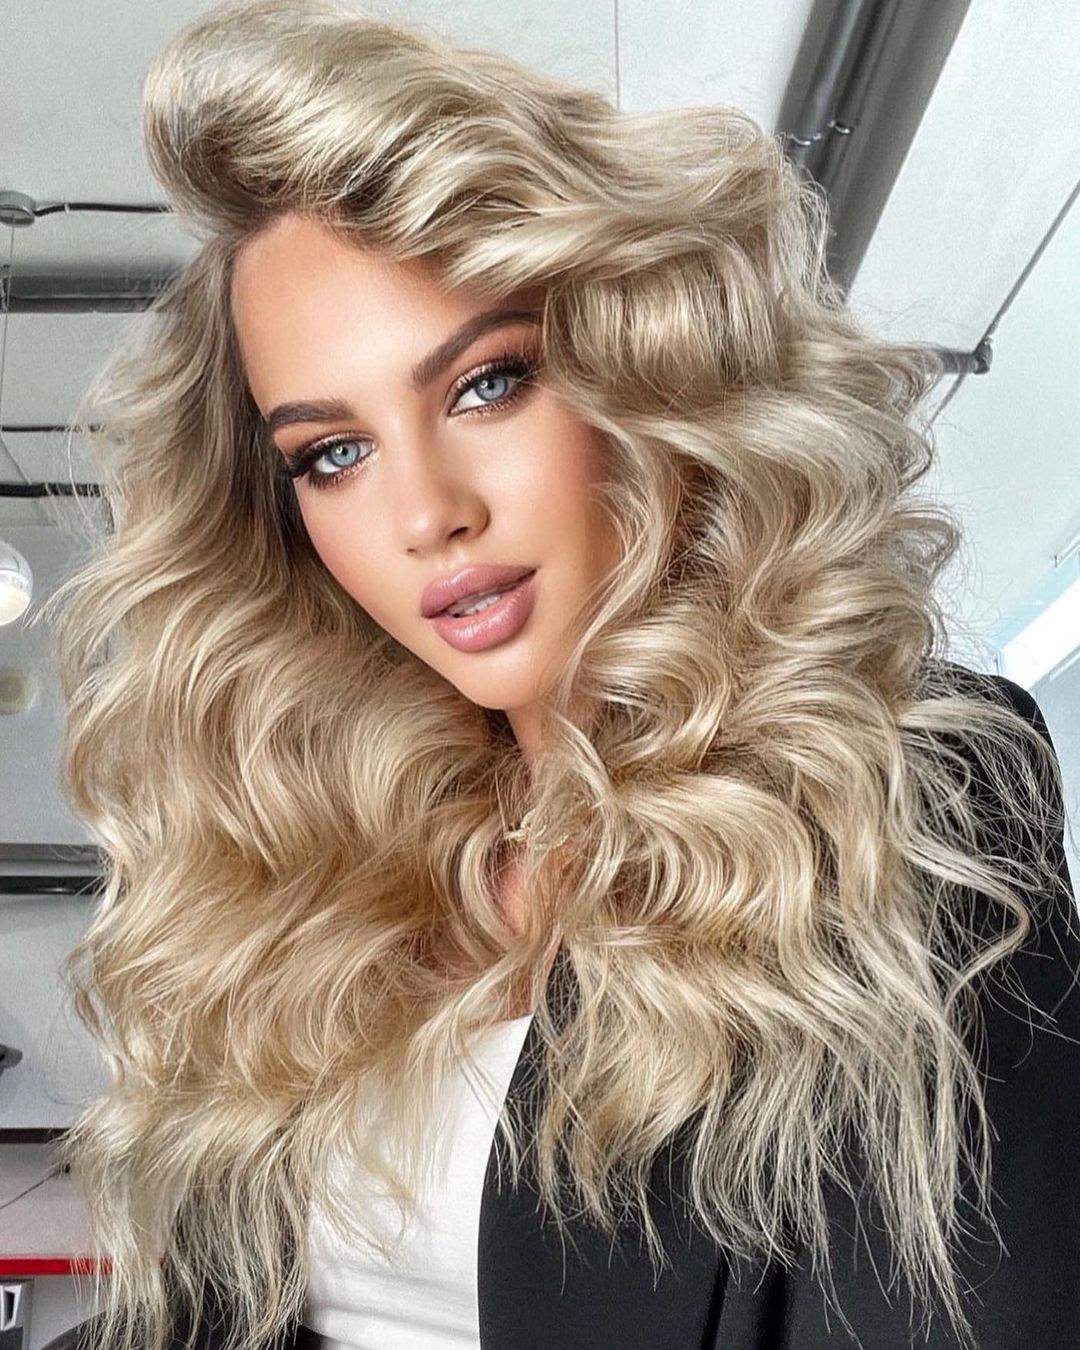 40+ Awesome Hairstyles For Girls With Long Hair images 32